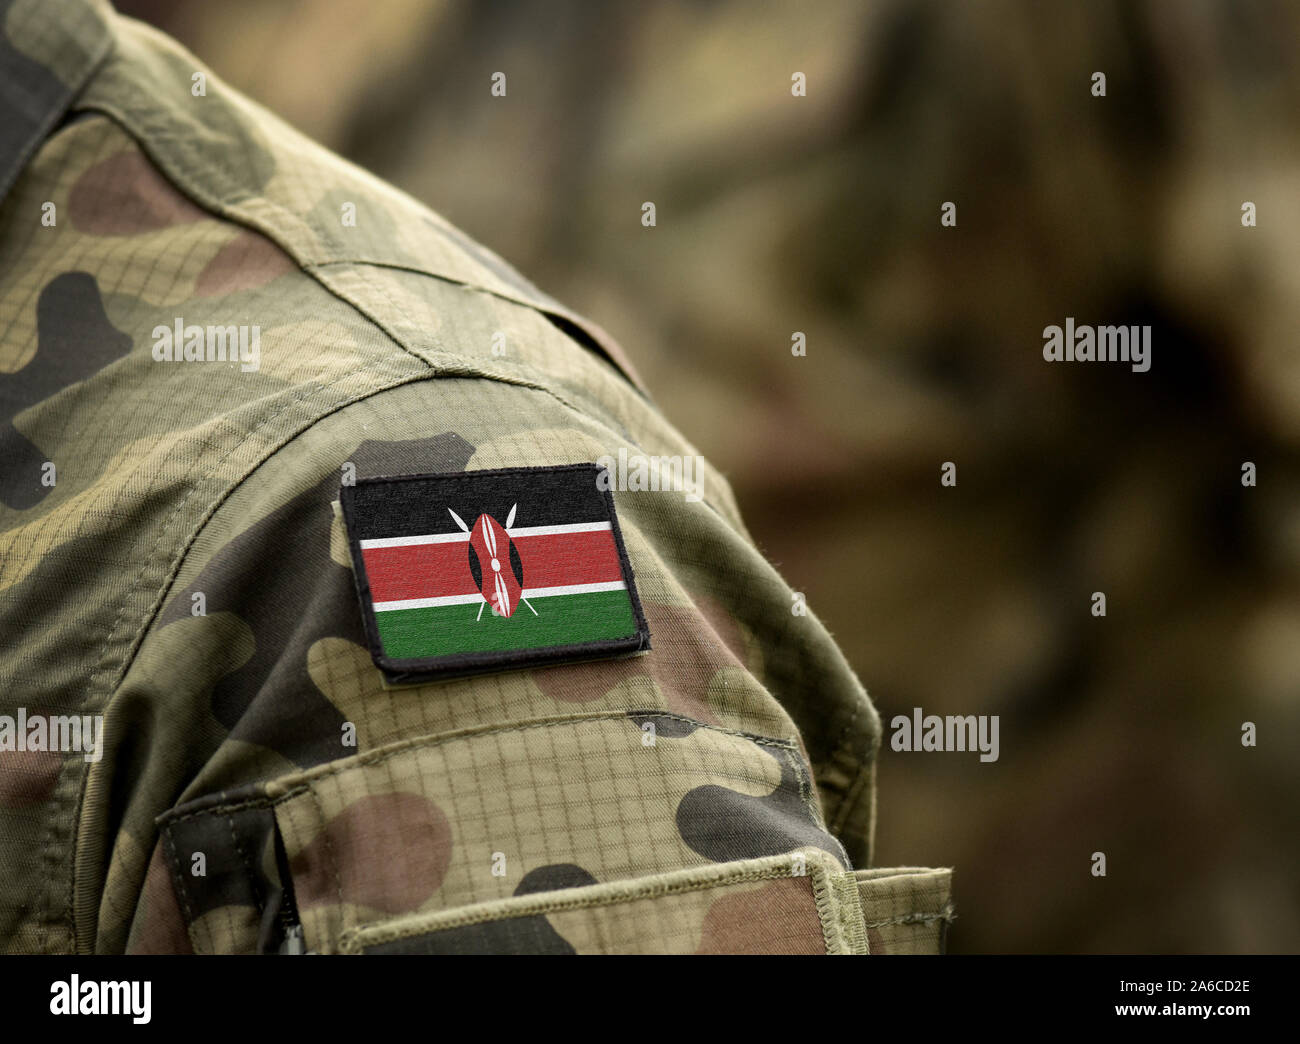 Flag of Kenya on military uniform. Army, troops, soldiers, Africa, (collage). Stock Photo